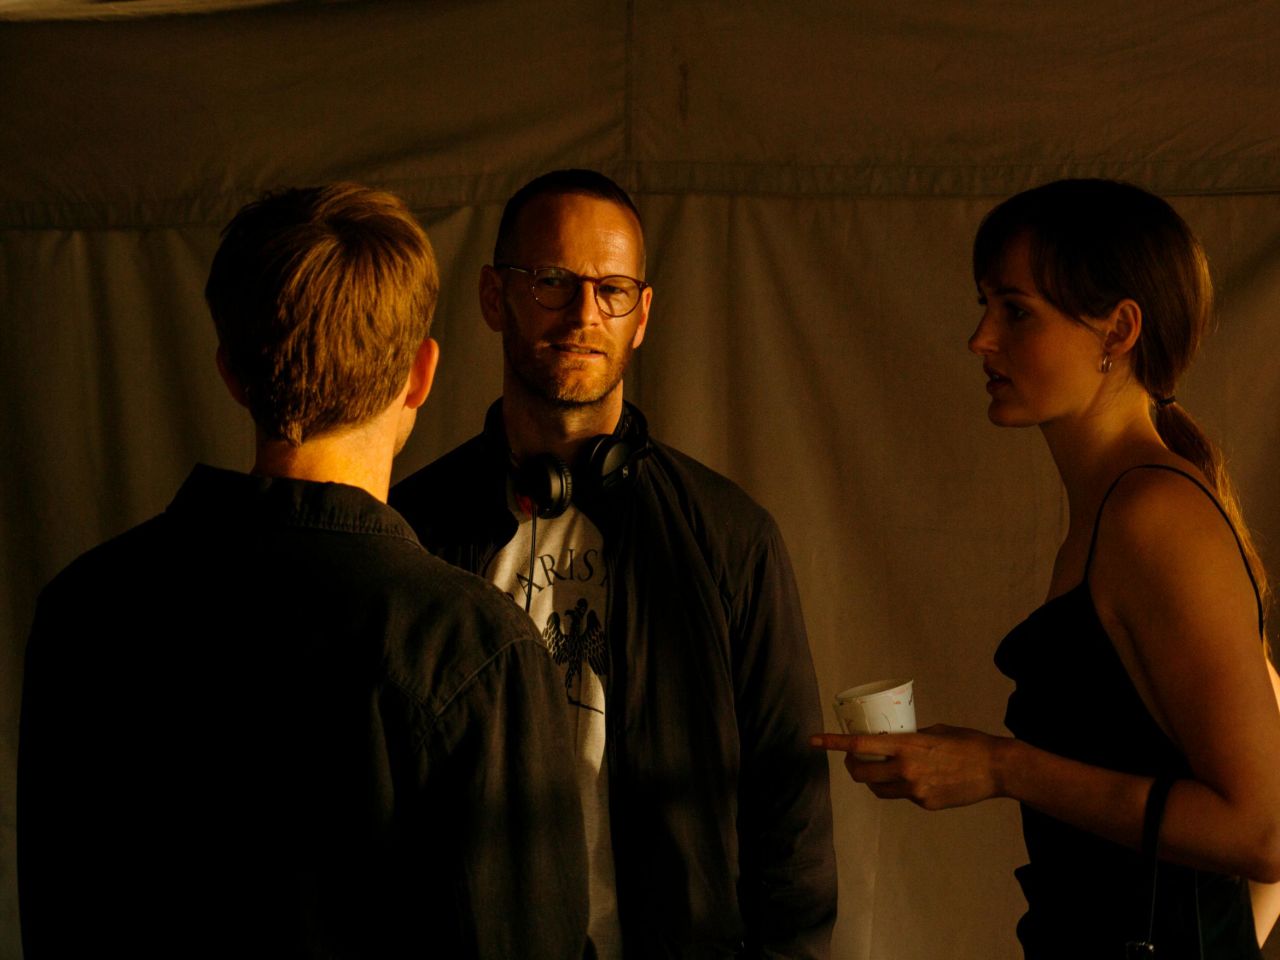 Joachim Trier alongside Anders Danielsen Lie (left) and Renate Reinsve (right) on the set of "The Worst Person in the World."